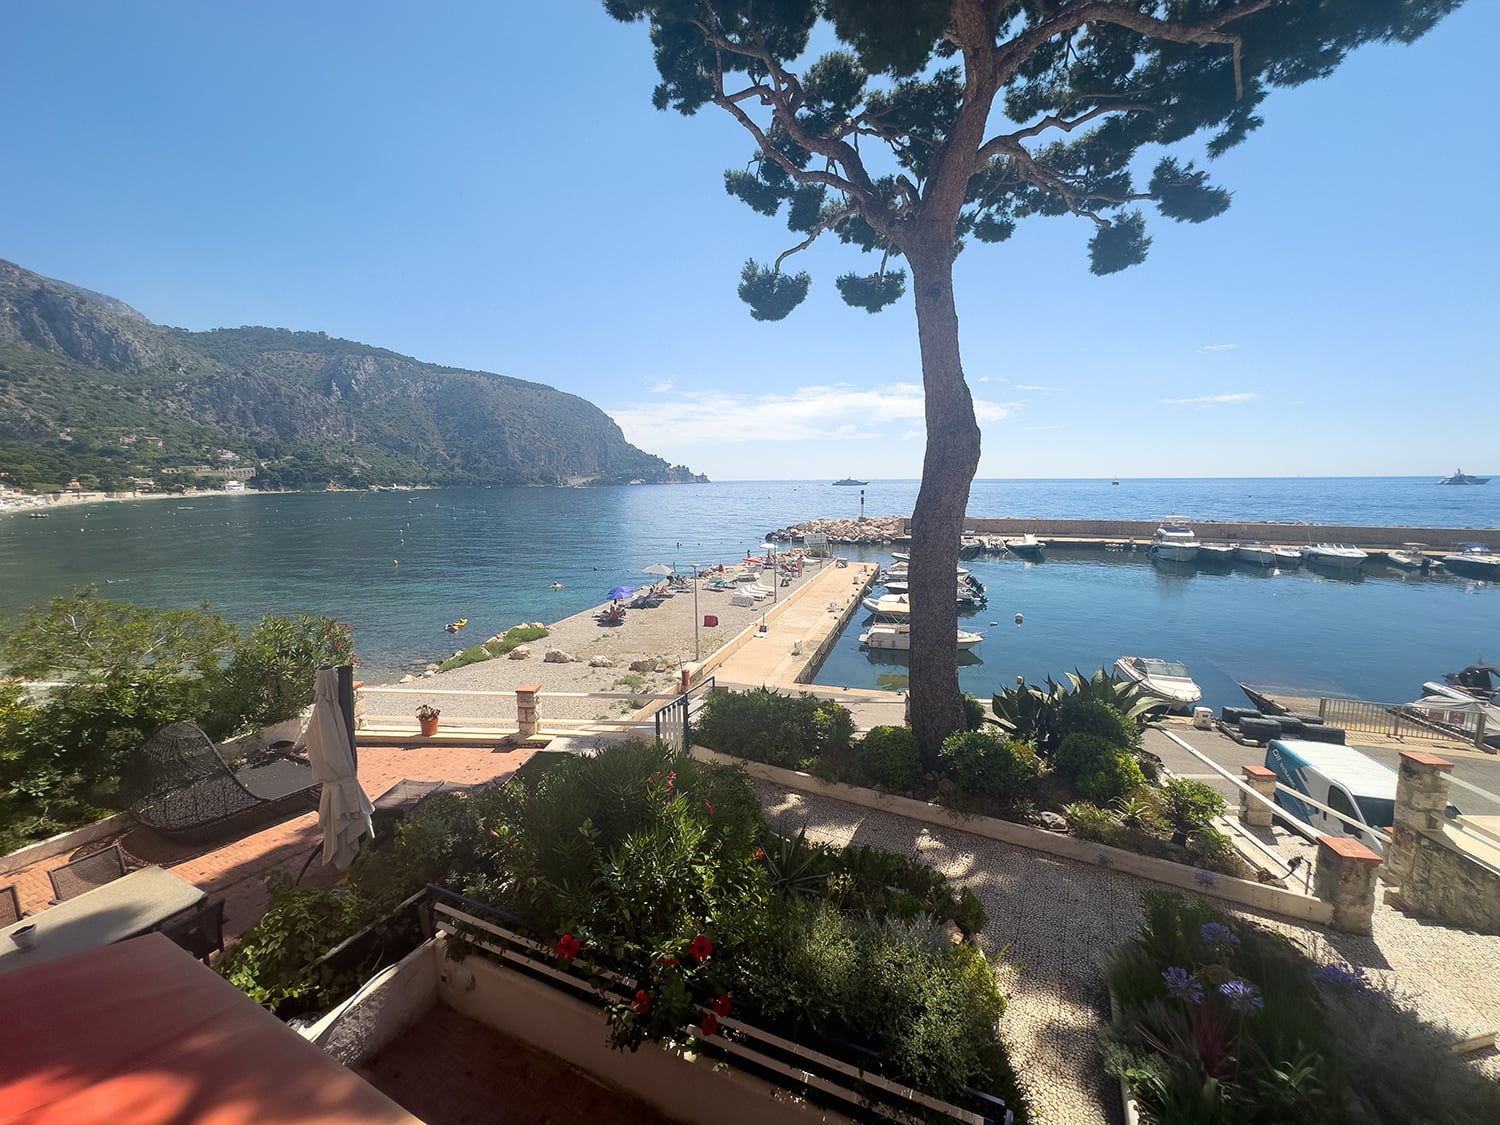 Panoramic Mediterranean views from the terrace